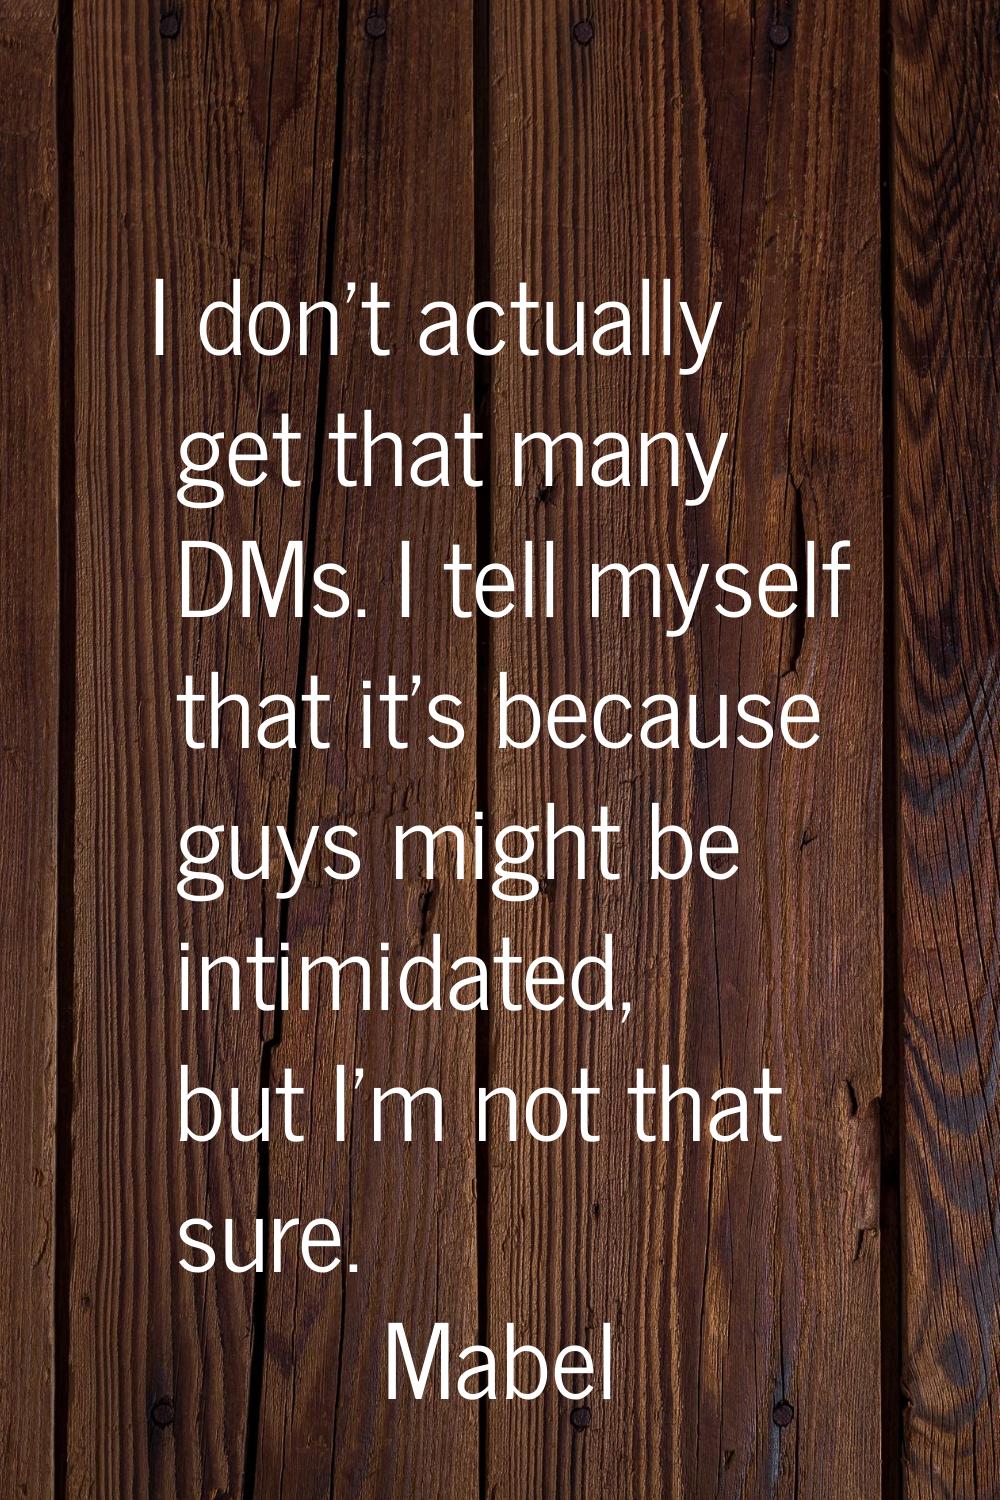 I don't actually get that many DMs. I tell myself that it's because guys might be intimidated, but 